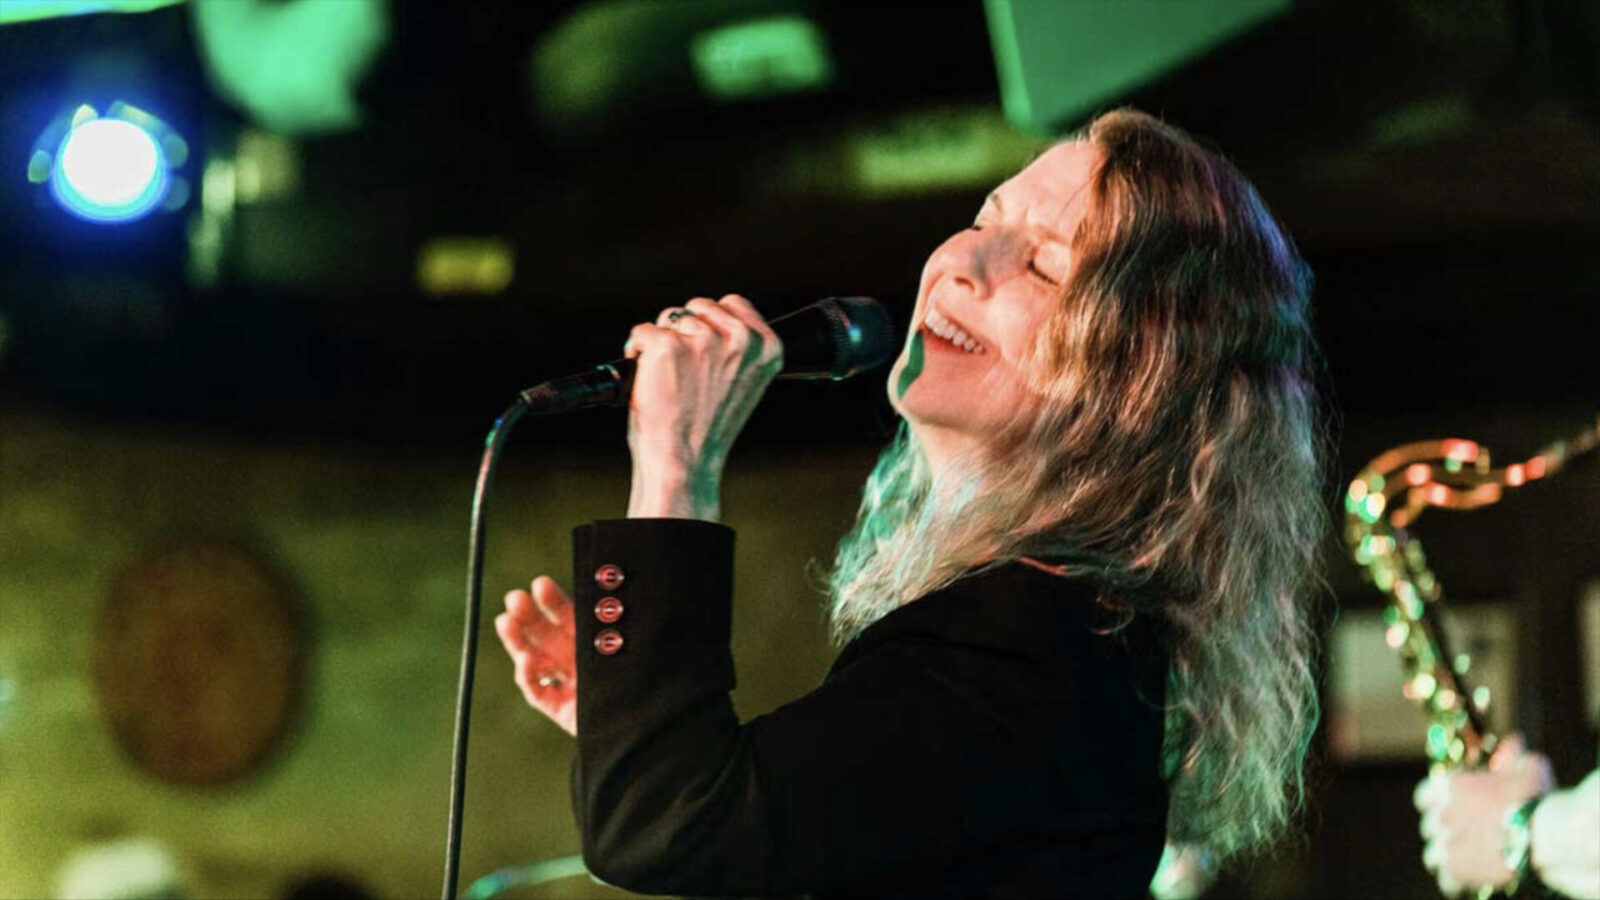 Jazz vocalist Suzi Stern performs in an outdoor concert at night. Press photo courtesy of the artist